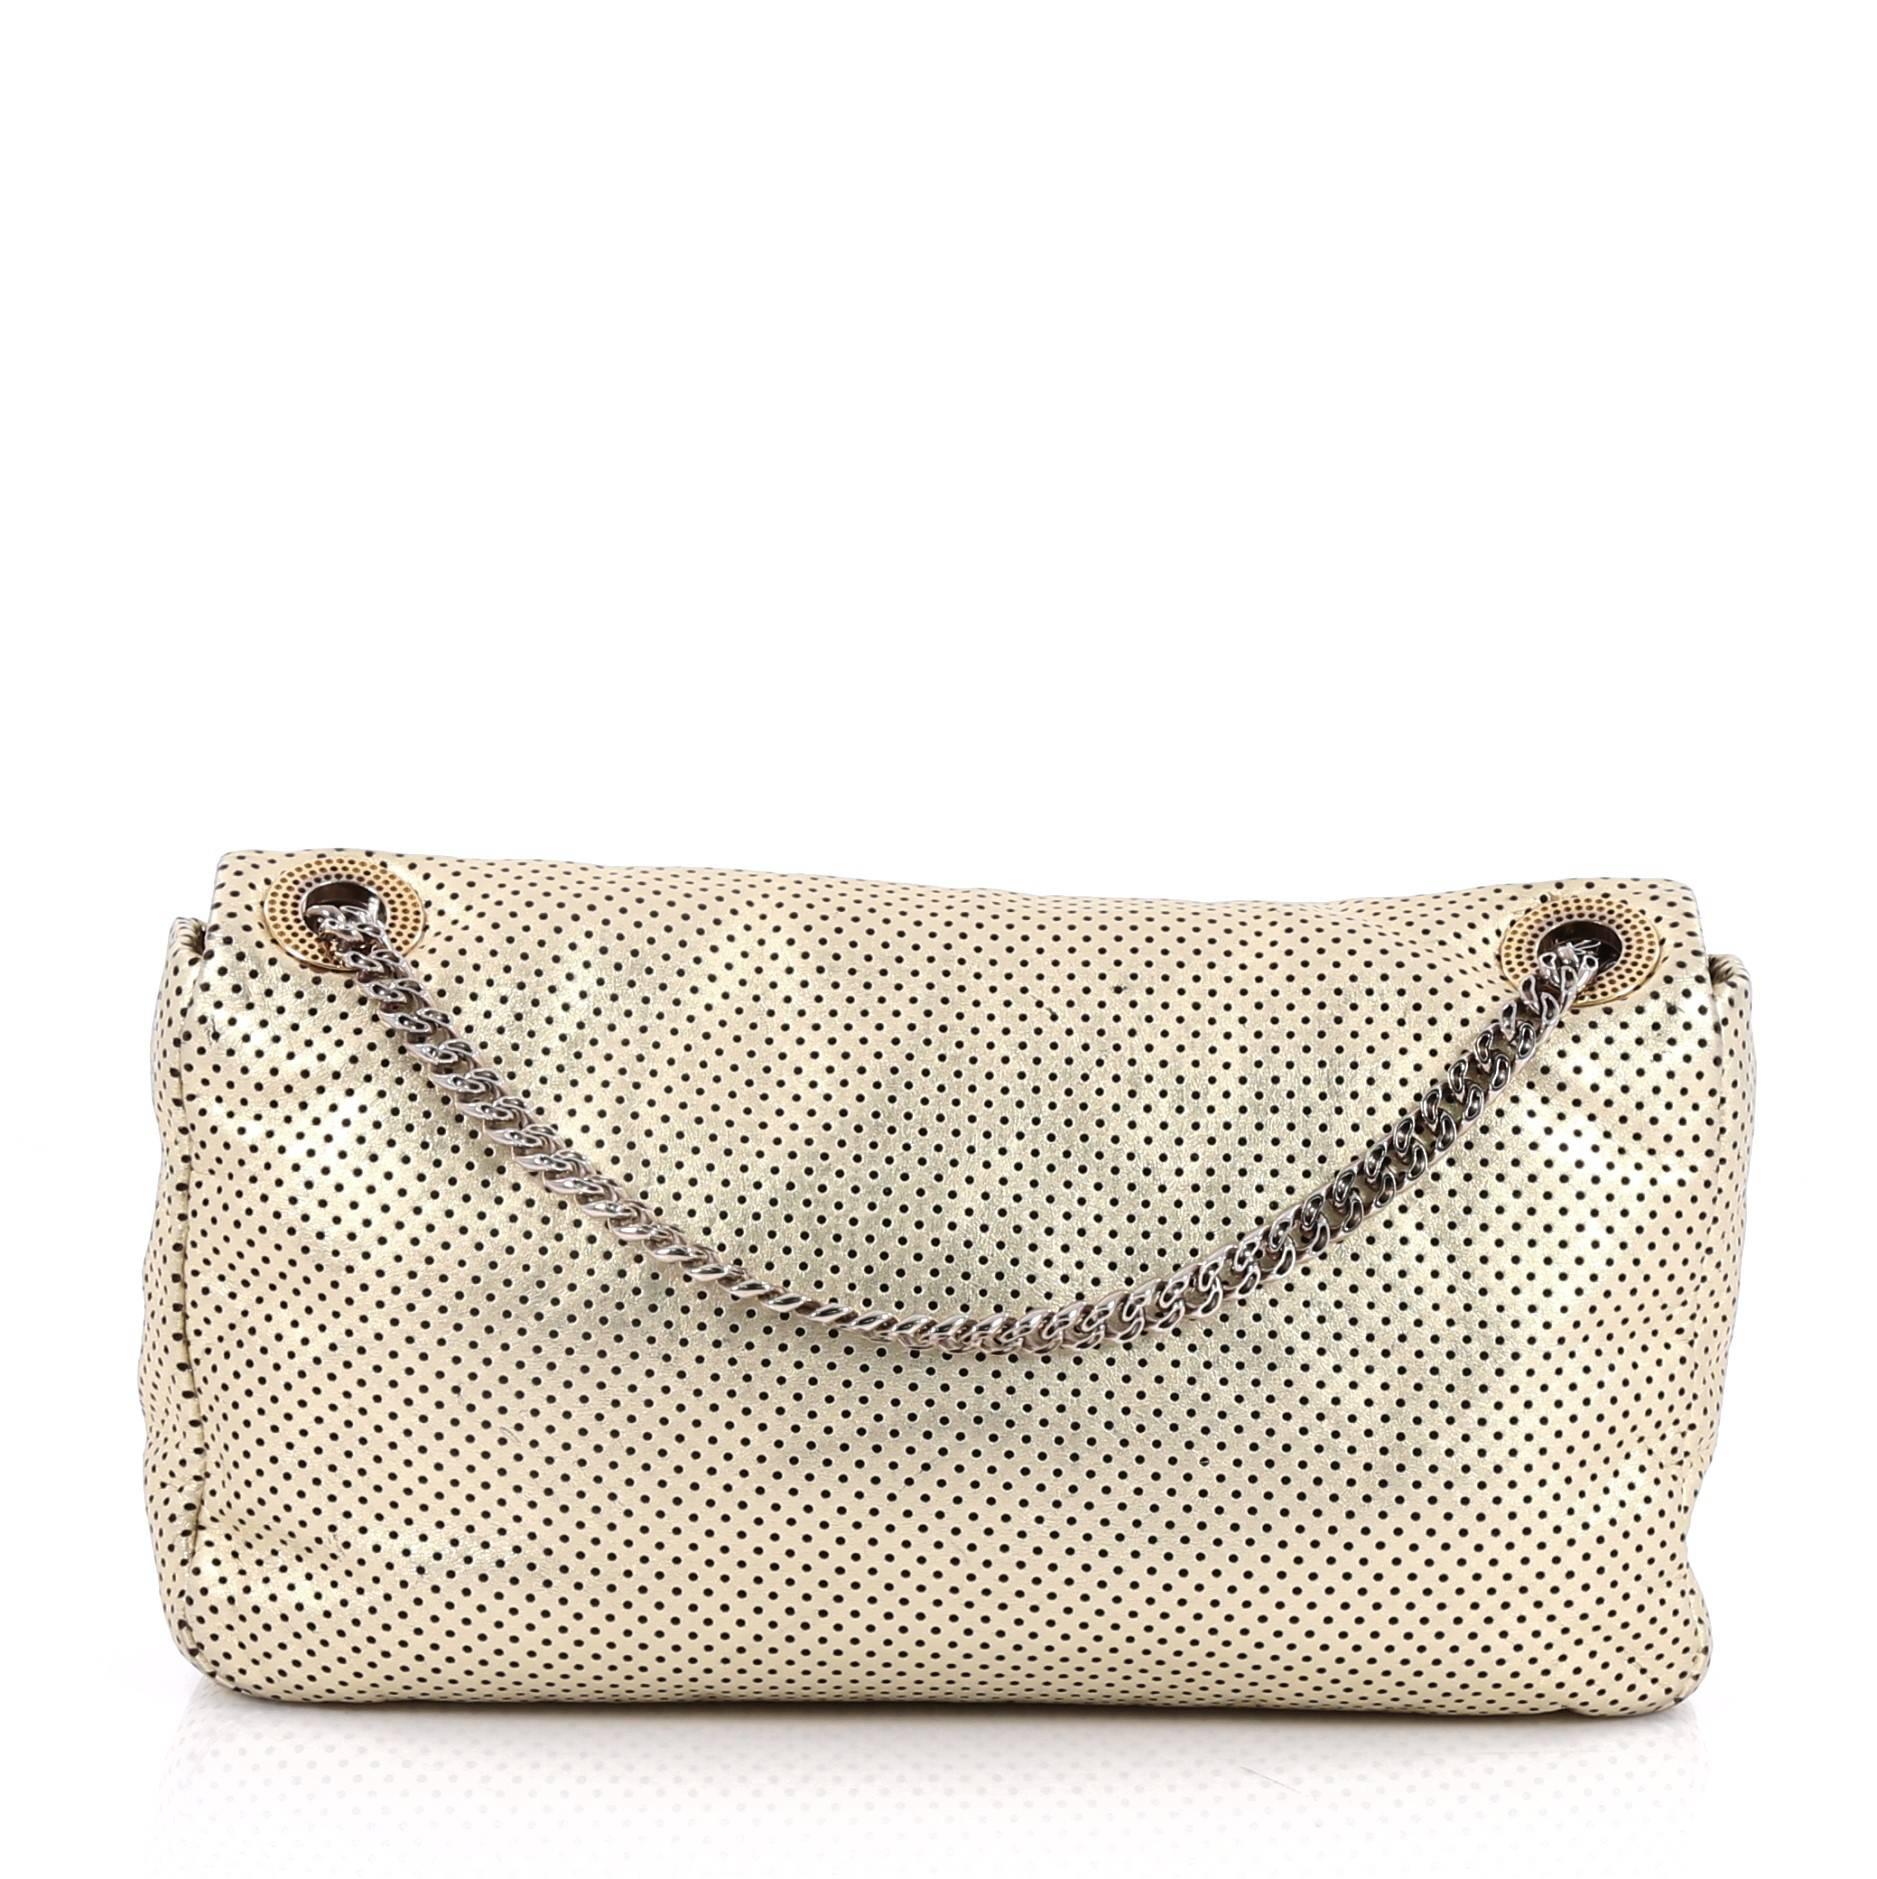 Beige Chanel Drill Flap Bag Perforated Leather Medium